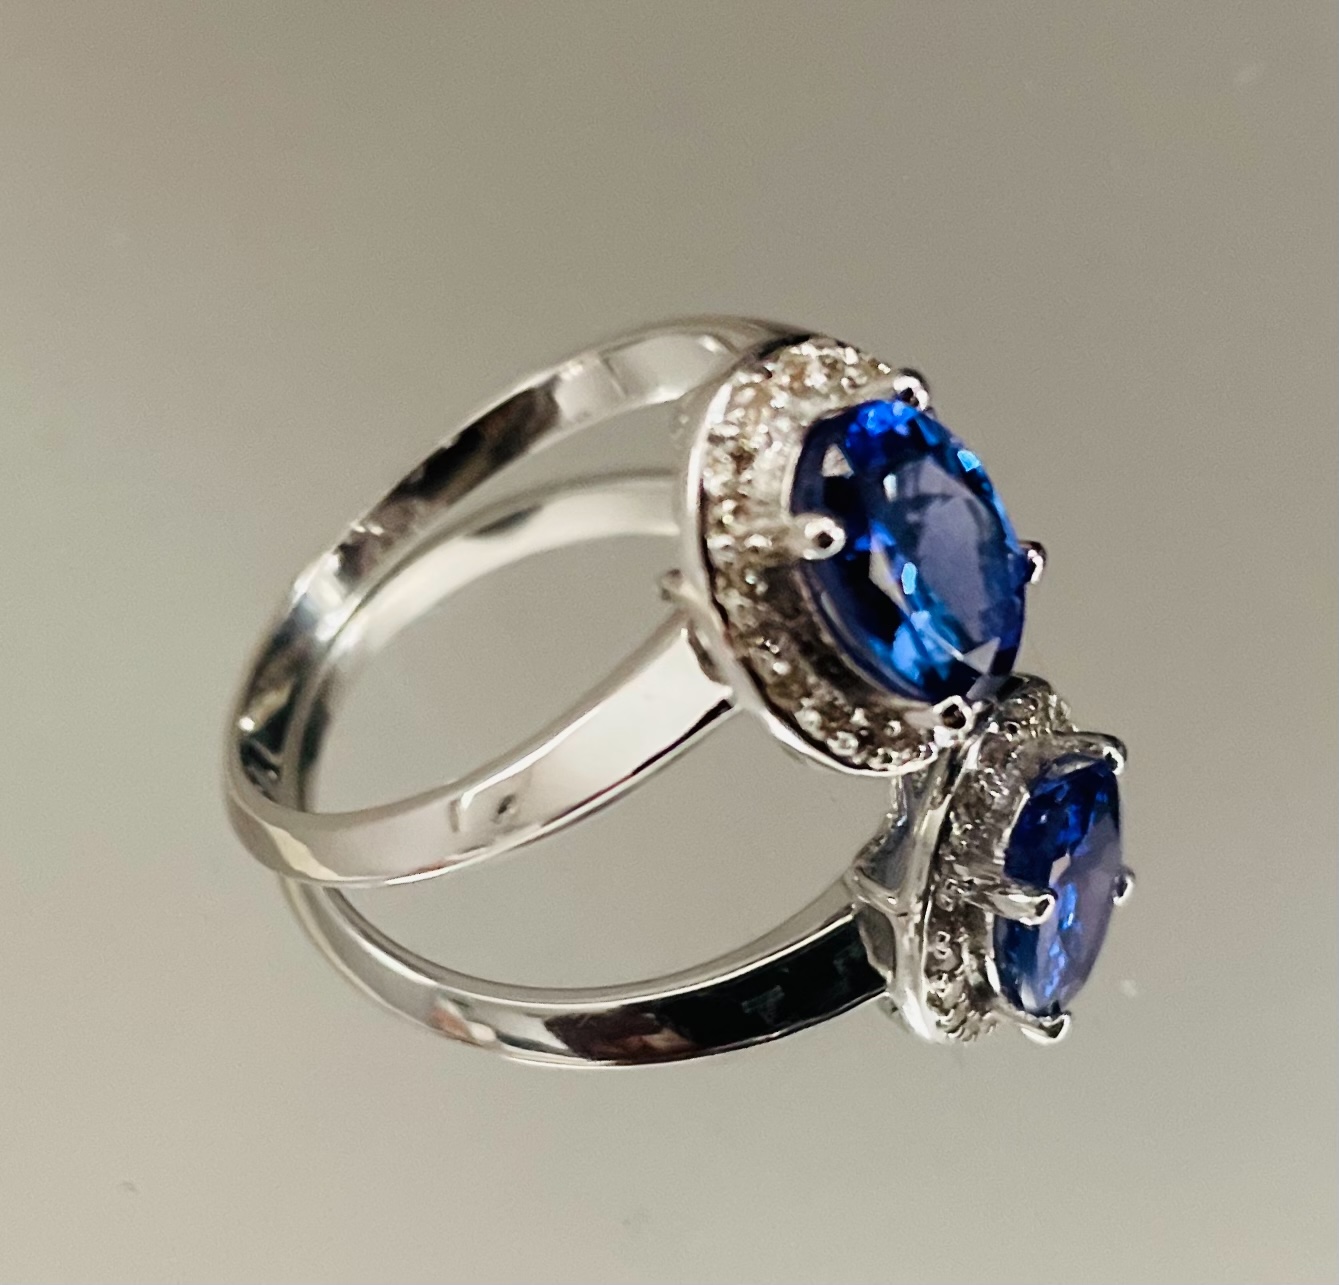 Beautiful Natural Tanzanite Ring With Diamonds And 18k Gold - Image 2 of 5